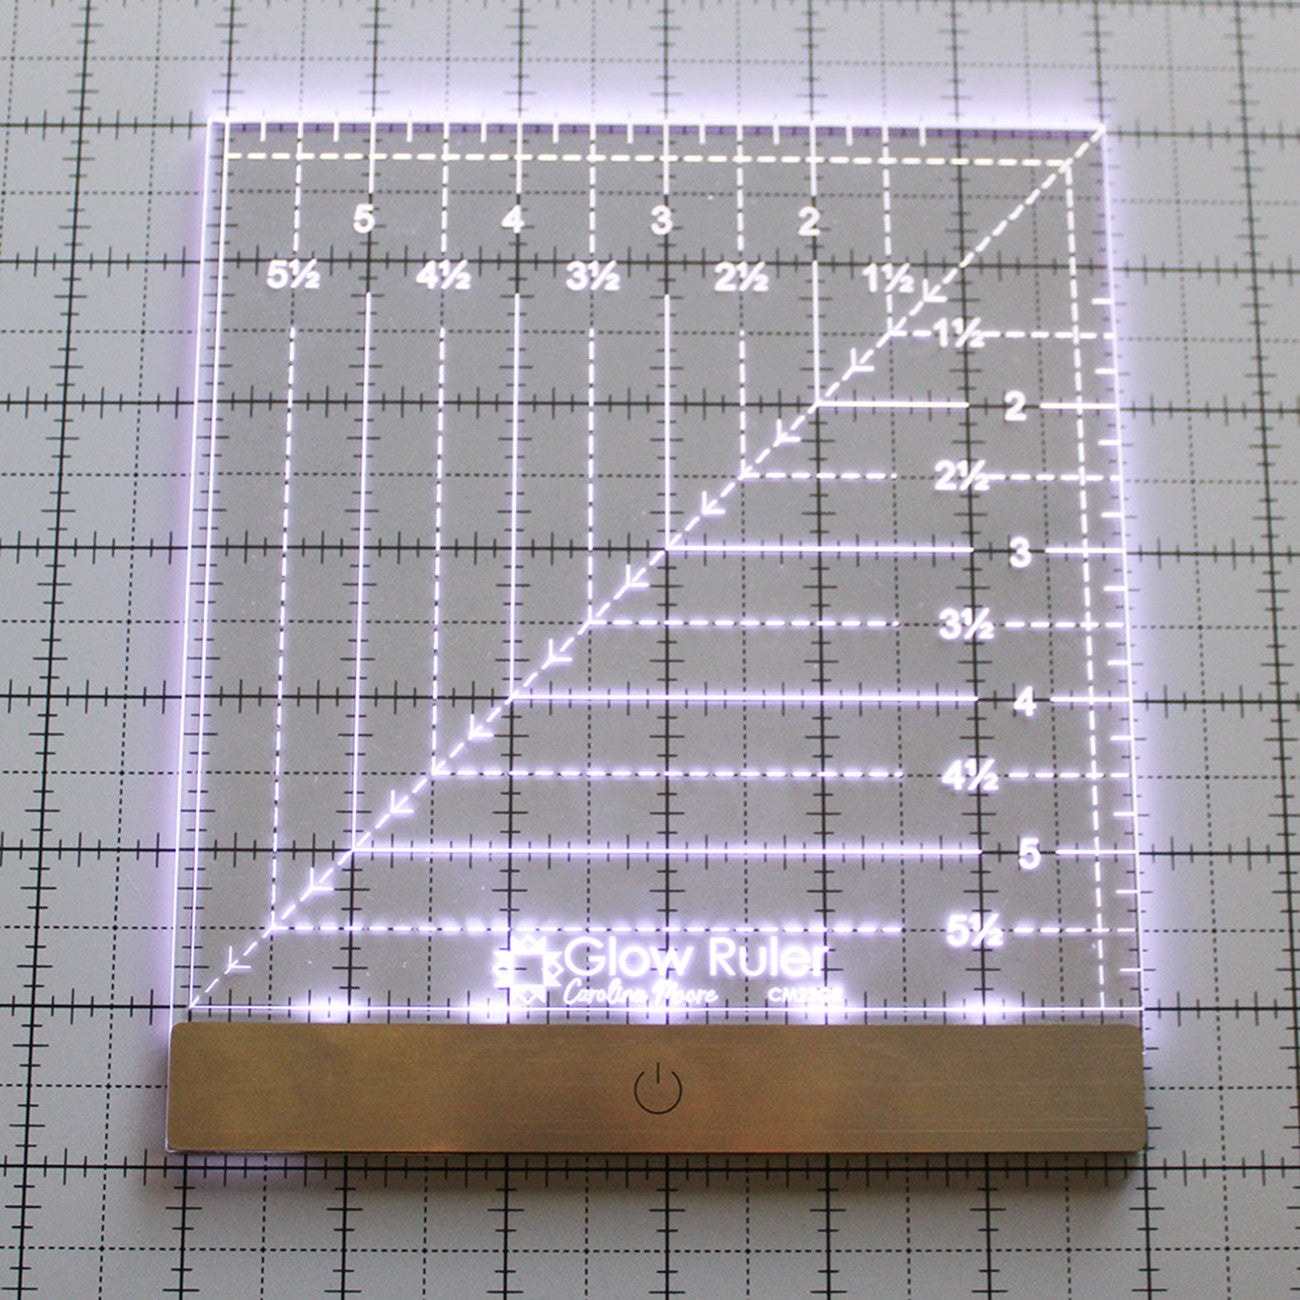 Glow Quilt Ruler 6-Inch Square LED Lighted Tool by Carolina Moore